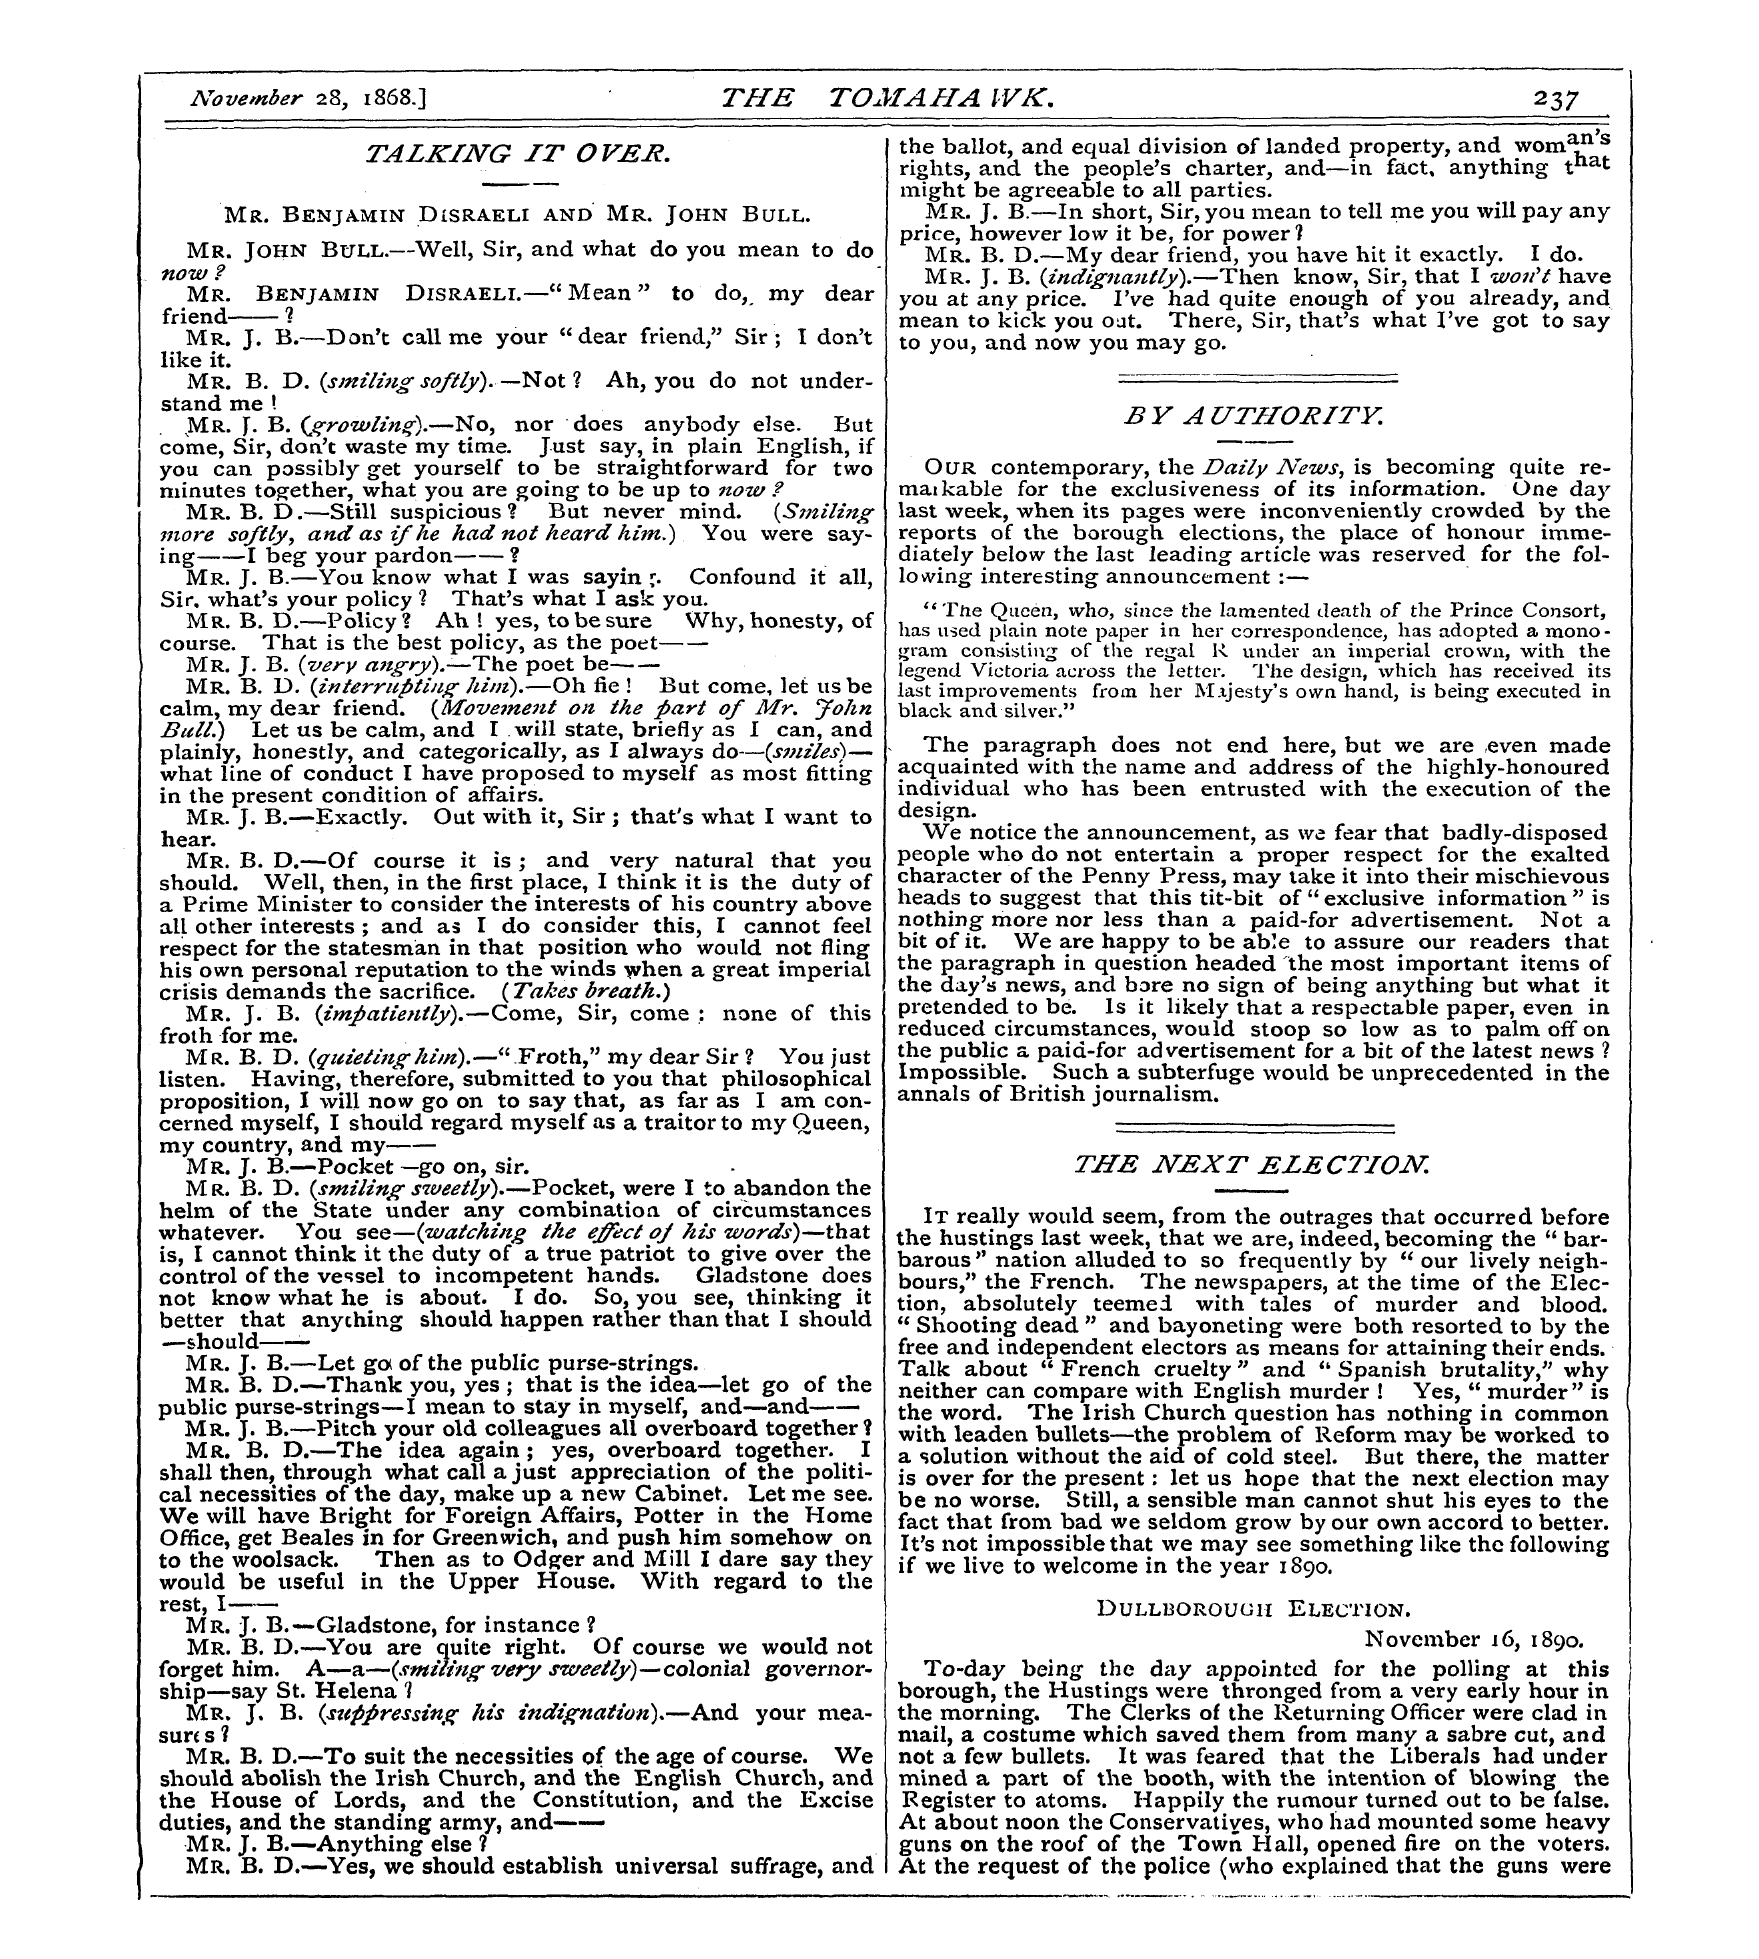 Tomahawk (1867-1870): jS F Y, 1st edition - The Next Election.